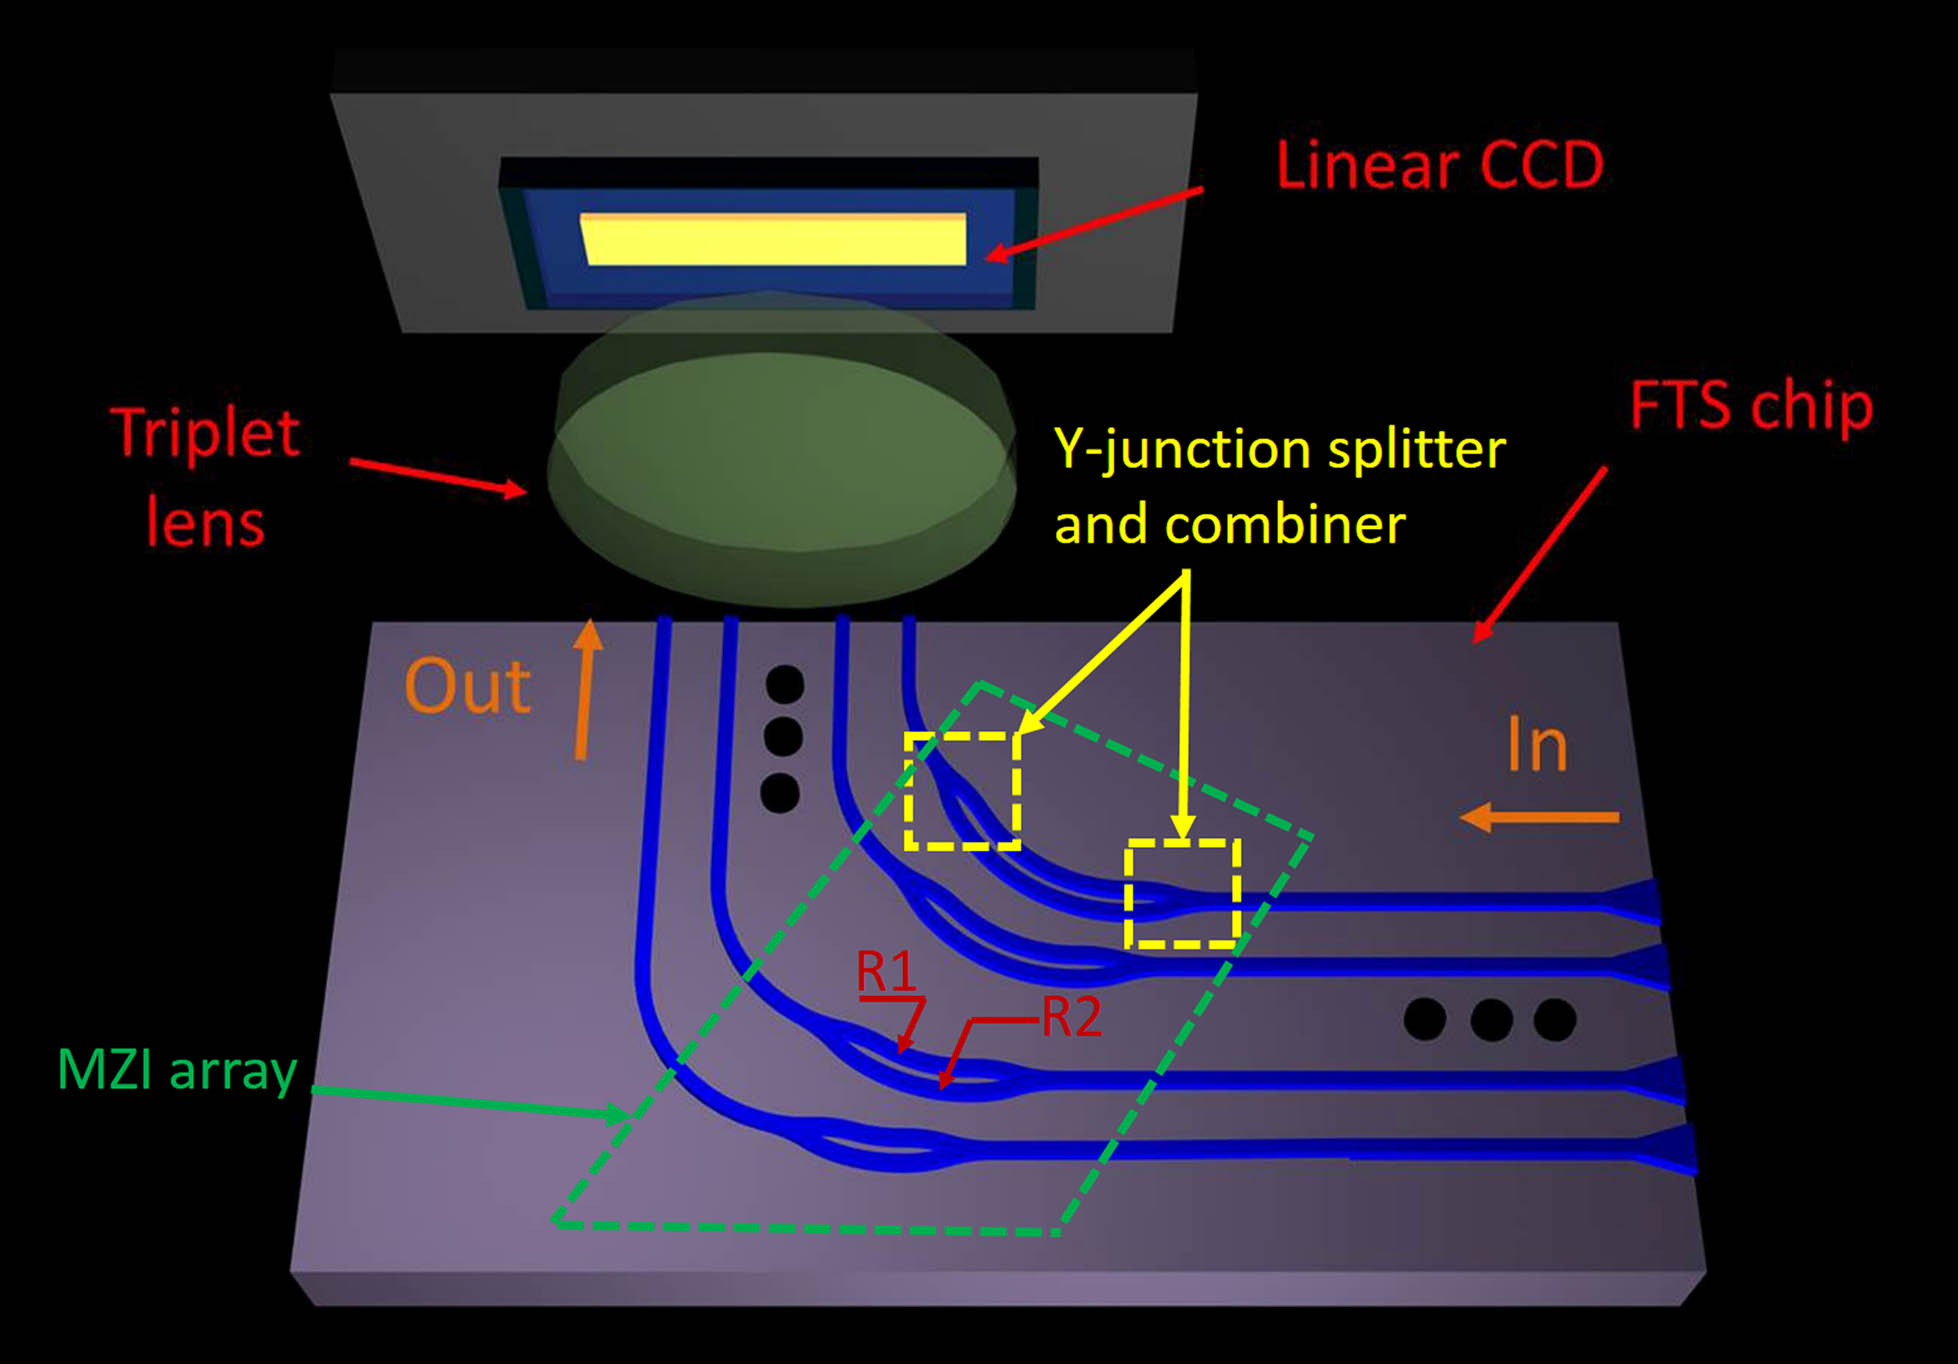 Structure schematic of the miniaturized spectrometer. Three major parts including FTS chip, triplet lens, and linear CCD form the miniaturized spectrometer. In the FTS chip, the green box indicates the MZI array, and the yellow boxes indicate the Y-junction splitter and combiner. The two arms of each MZI have the same rotation angle but different radii as R1 and R2, leading to the OPD (optical path difference). The OPD in each MZI changes across the array along with the variation of the rotation angle.